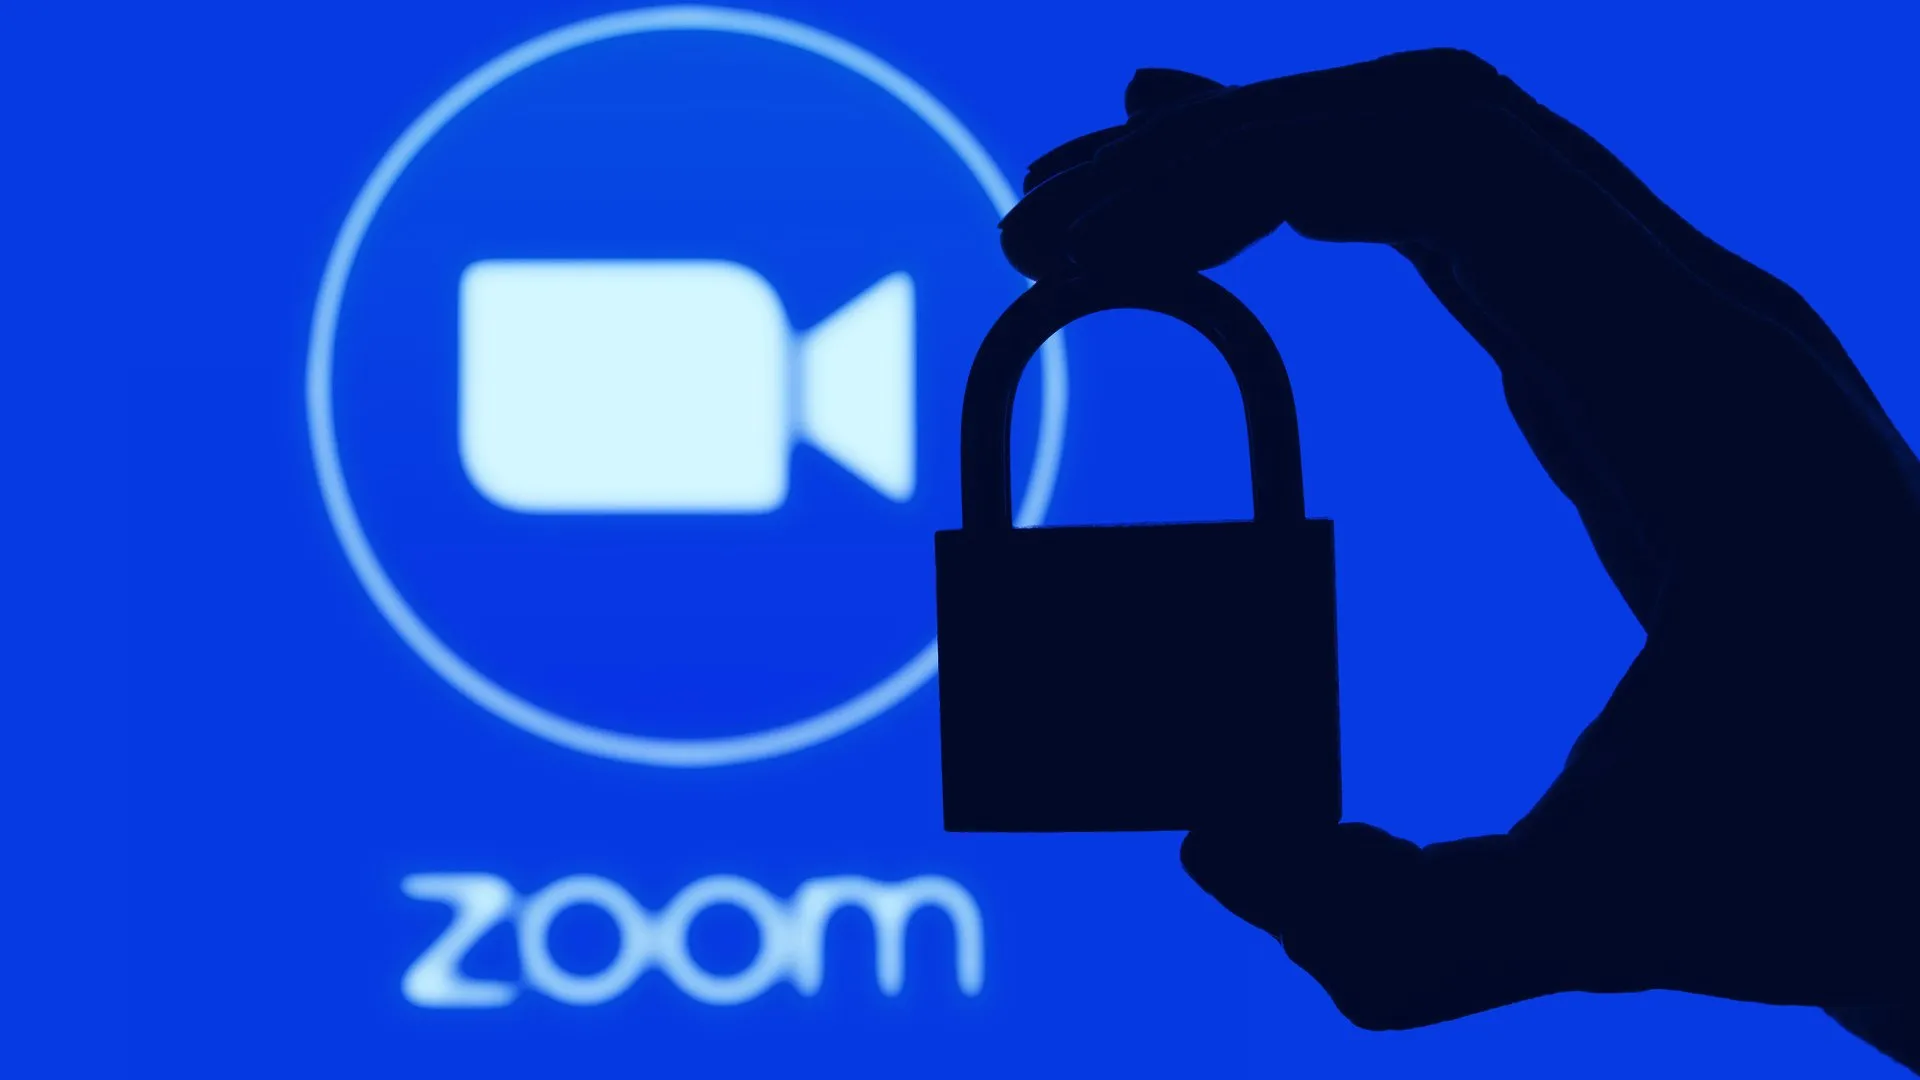 Zoom enables encryption for its premium users only allowing the FBI to snoop on non-paying members. Image: Shutterstock